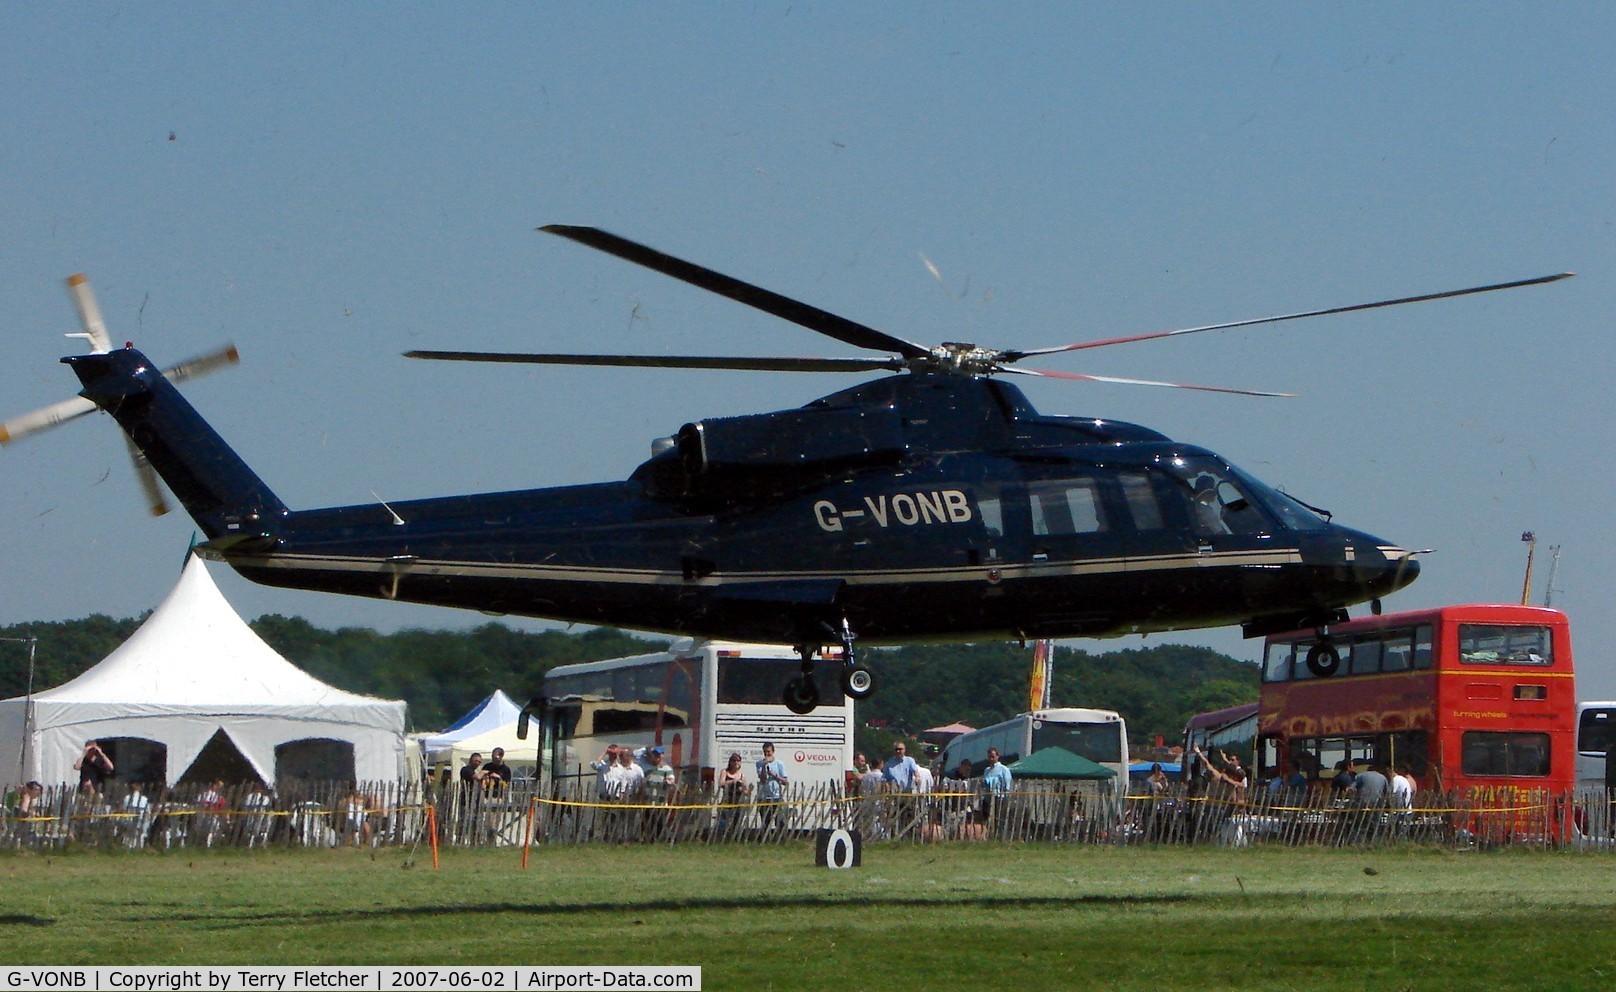 G-VONB, 1992 Sikorsky S-76B C/N 760399, Helicopters arrive at the temporary Heliport on 2007 Epsom Derby Day (Horse racing)